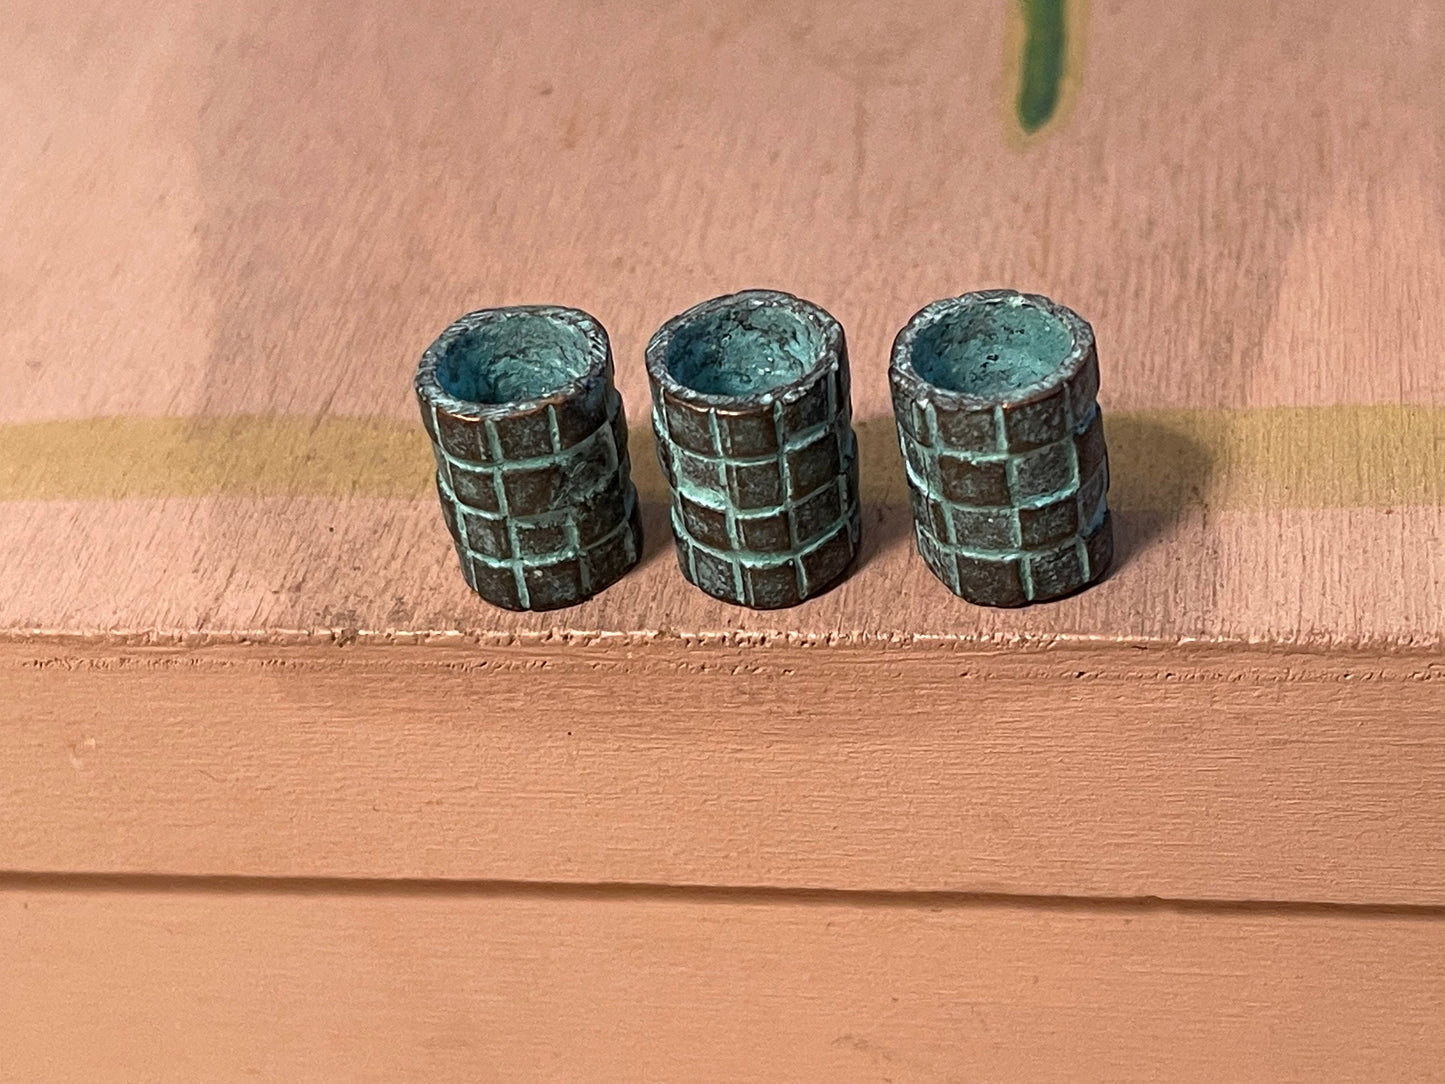 Big hole tube Beads - checkered barrel relief design (lot of 2 or 6) large copper plated green patina findings handcrafted in Mykonos Greece